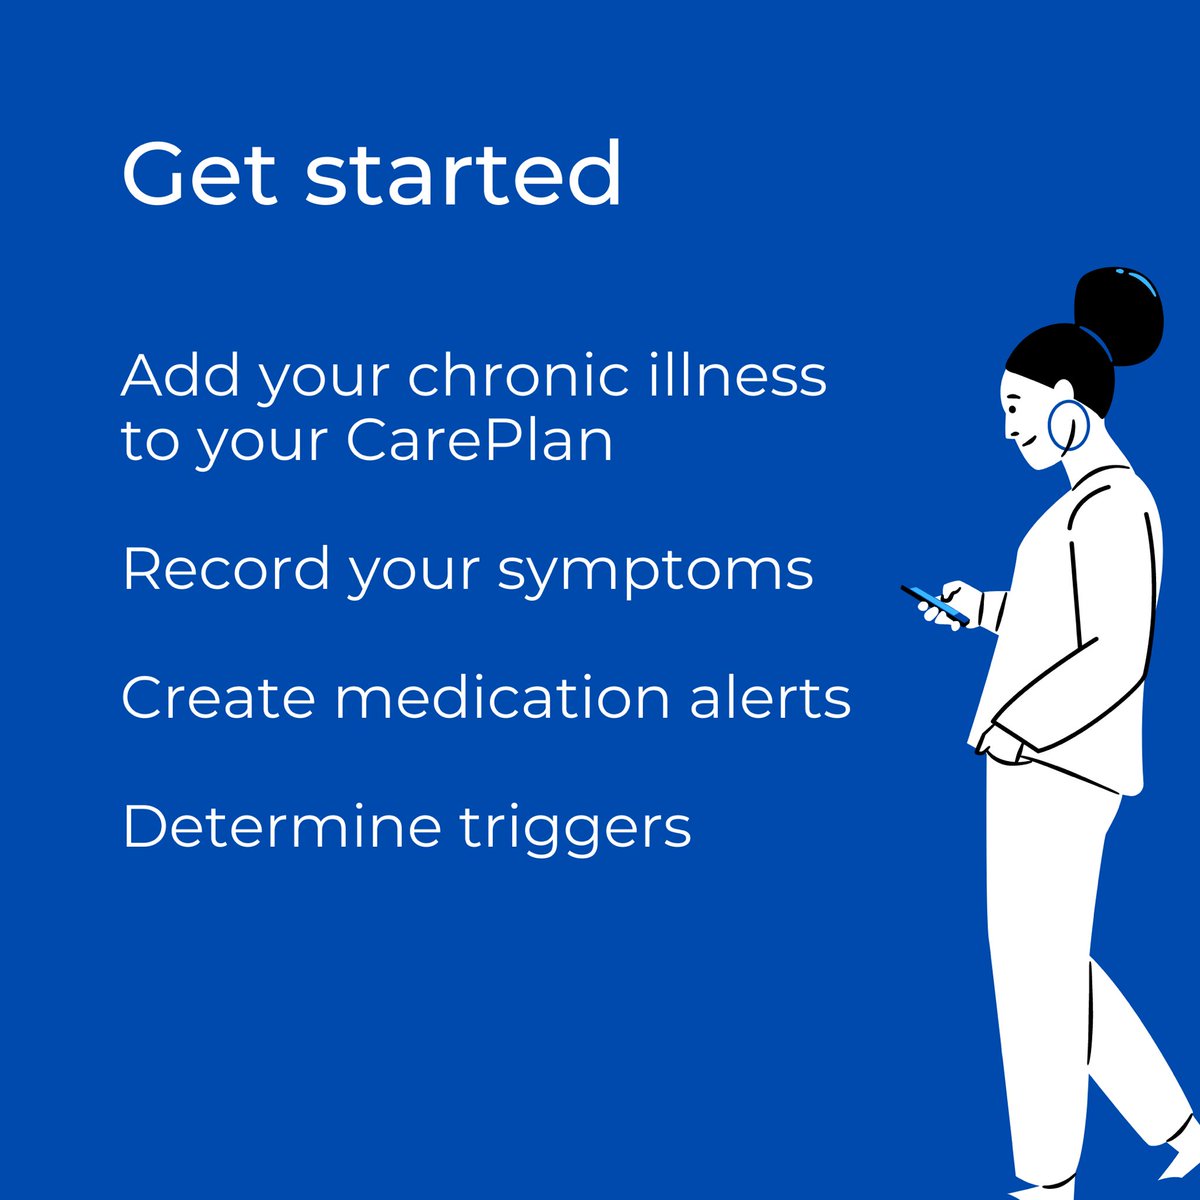 CareClinic is a free app that can assist one in managing their chronic illness - track your symptoms, set medication alerts and share your care plan with caregivers all on one platform. careclinic.app.link/social
#chronicillness #chronicillnessmanagement